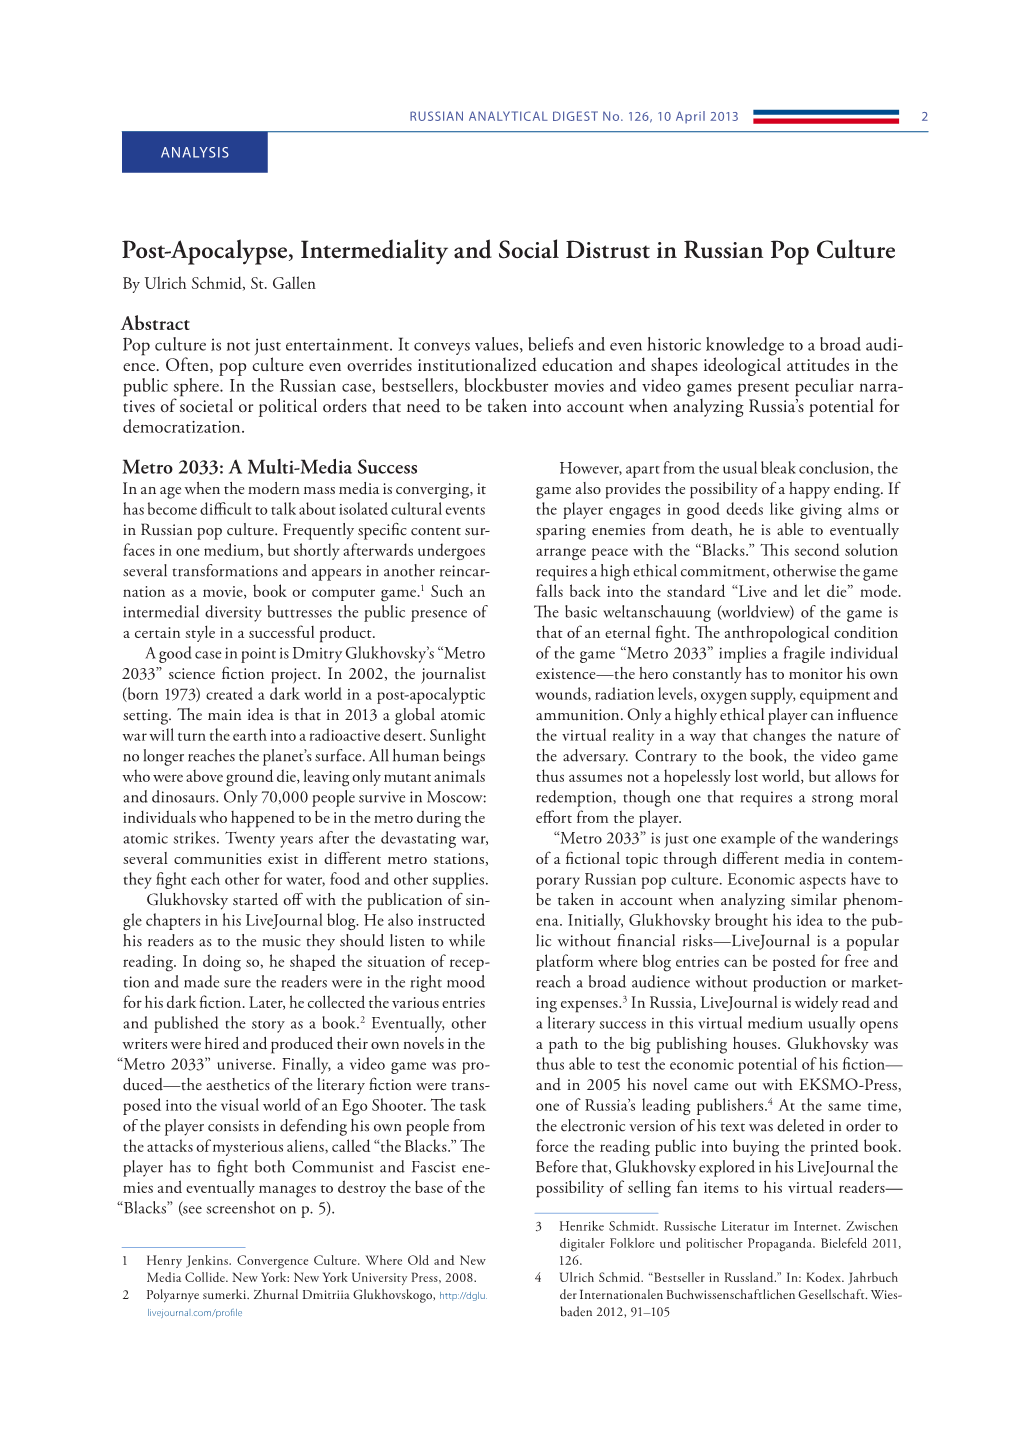 Post-Apocalypse, Intermediality and Social Distrust in Russian Pop Culture by Ulrich Schmid, St